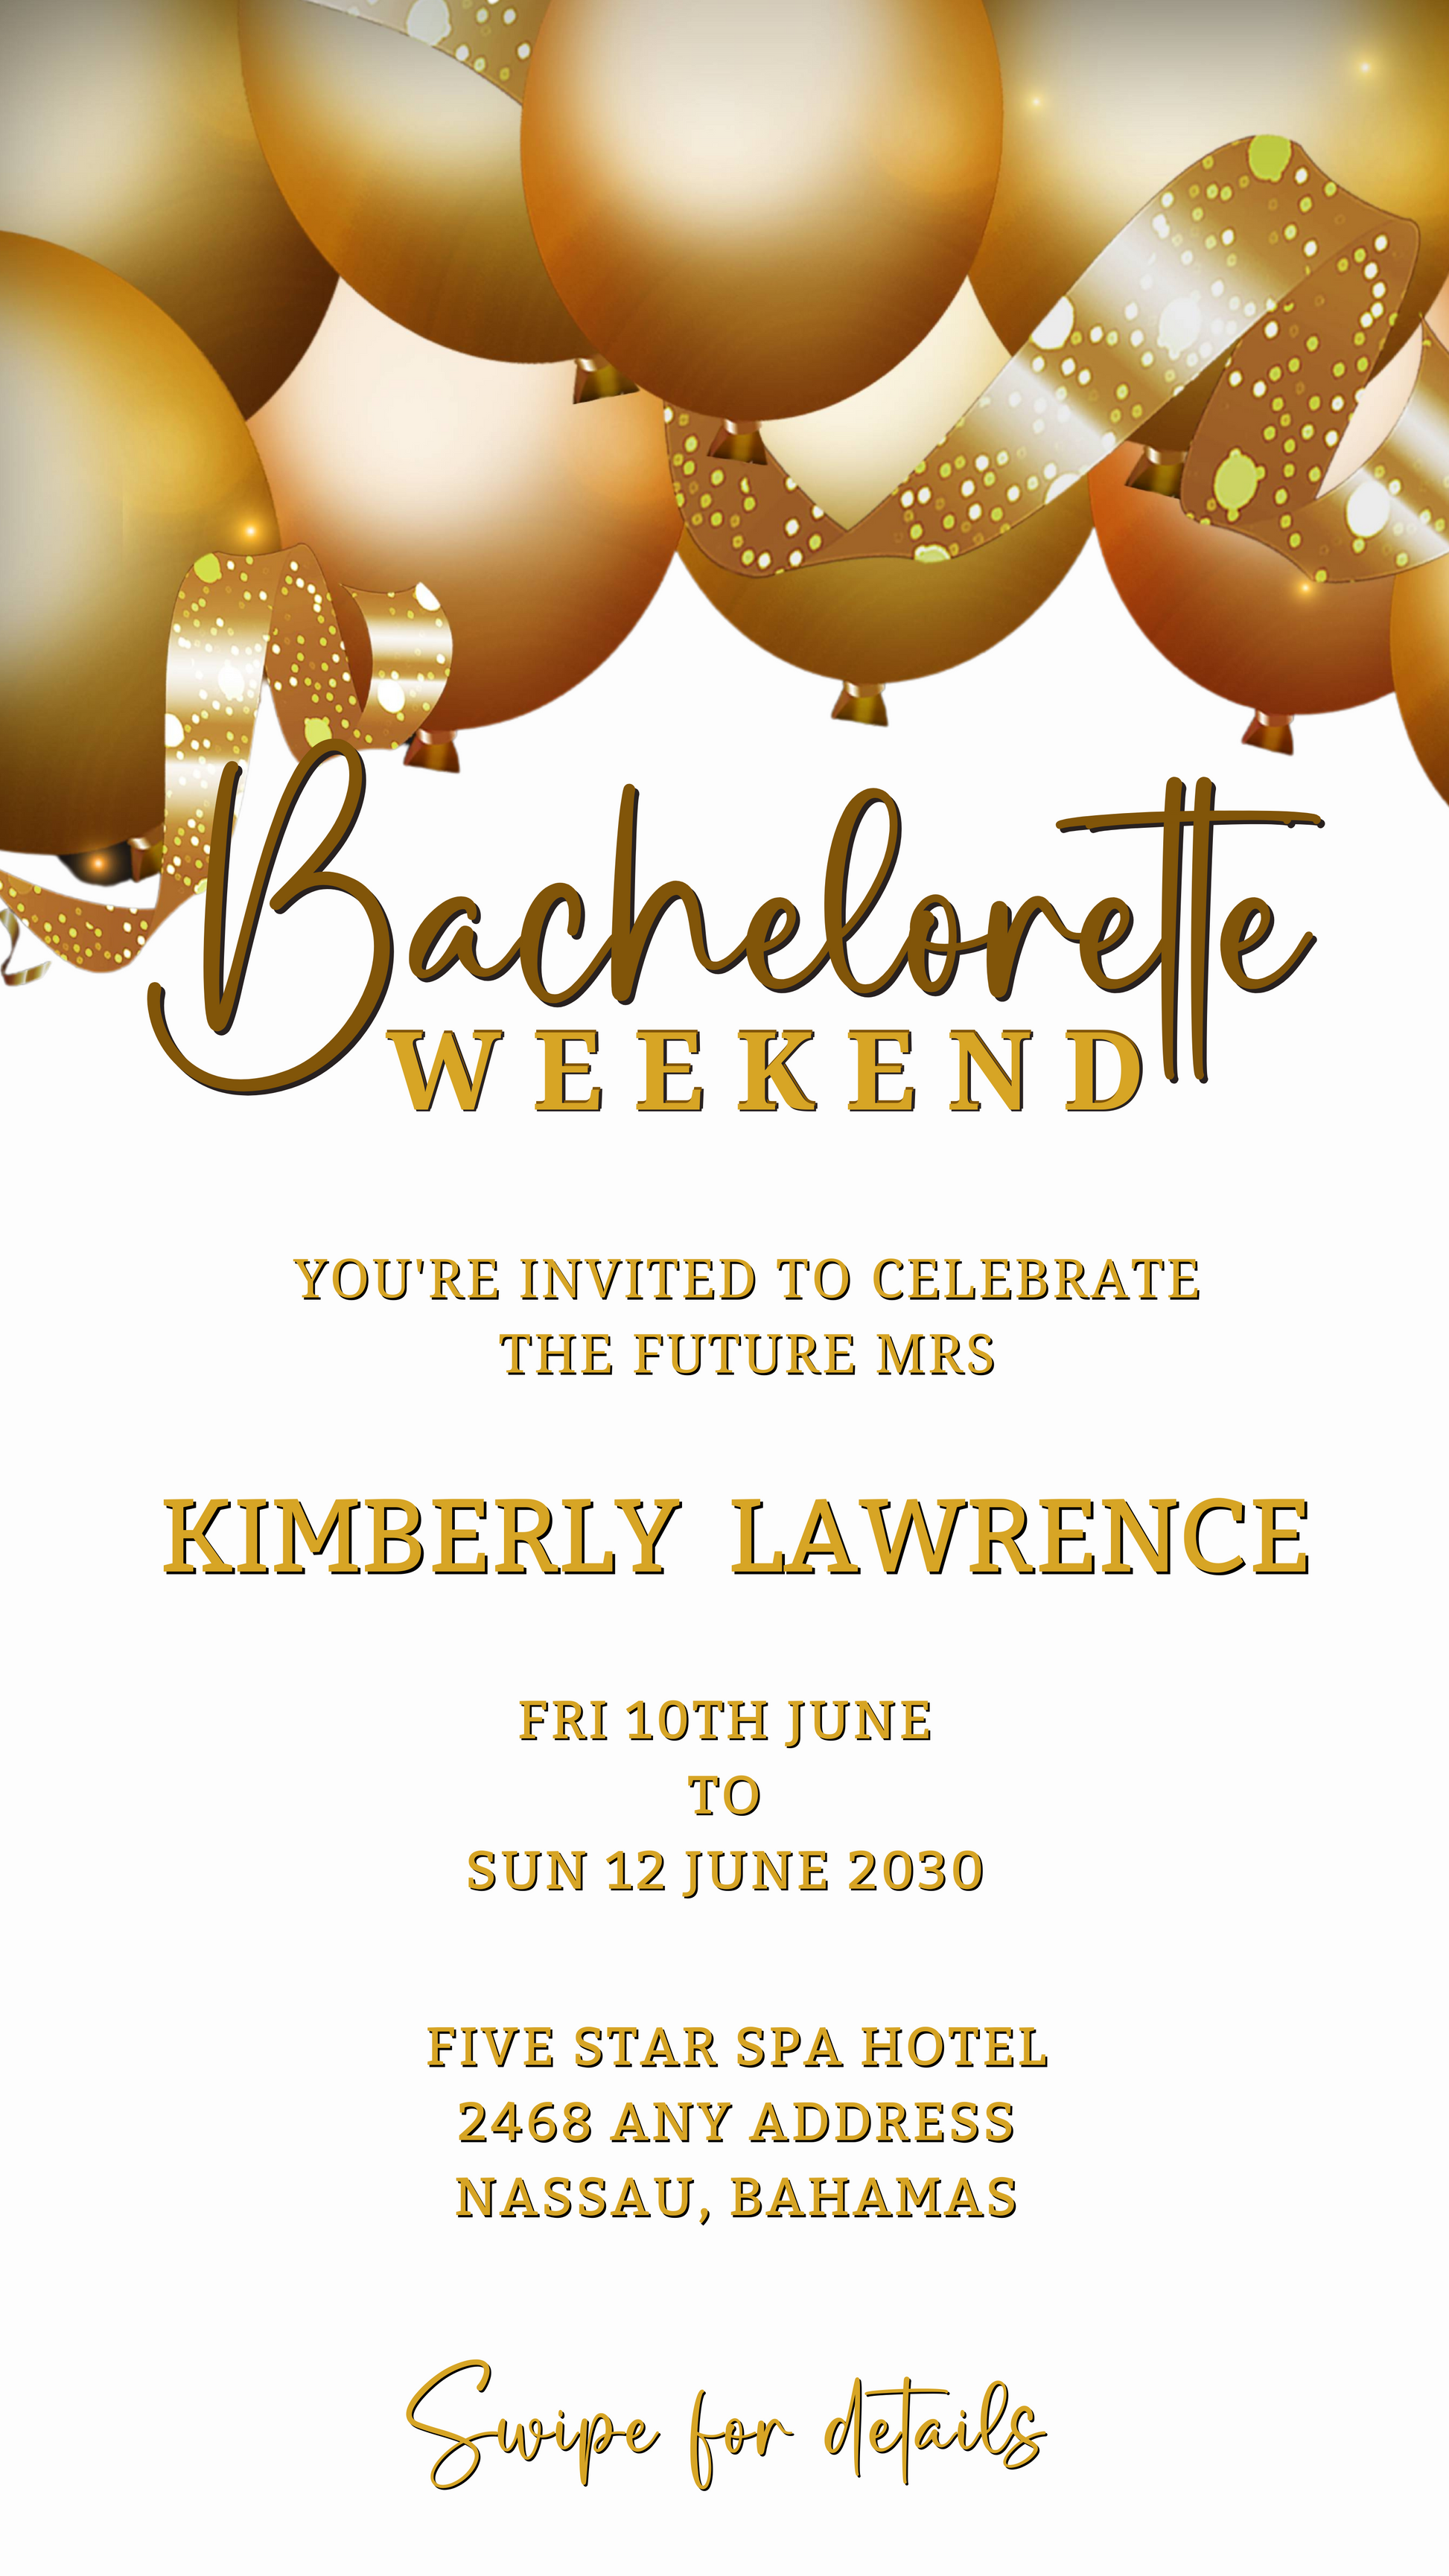 Gold Floating Balloons White | Bachelorette Weekend Evite template with customizable digital gold balloons on a white background, editable via Canva for smartphone sharing.